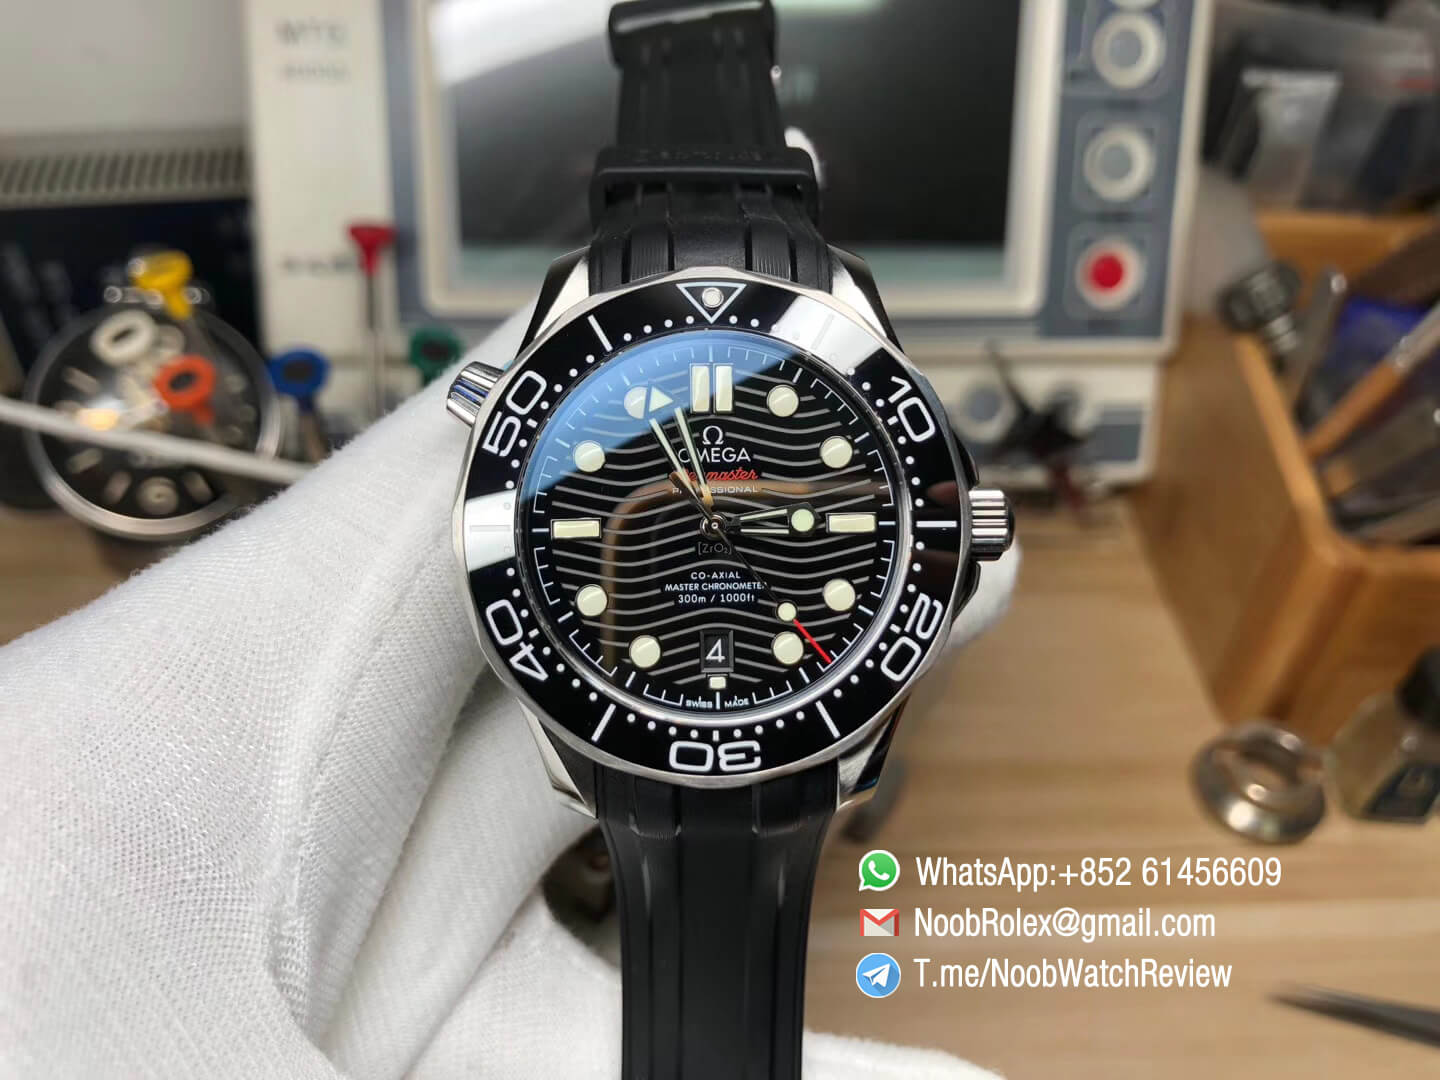 Vsf Seamaster Diver 300m Ceramic Bezel Black Dial Wavy Textured Rubber Strap A8800 Black Balance Wheel Noob Watch Review The Best Swiss Replica Watches